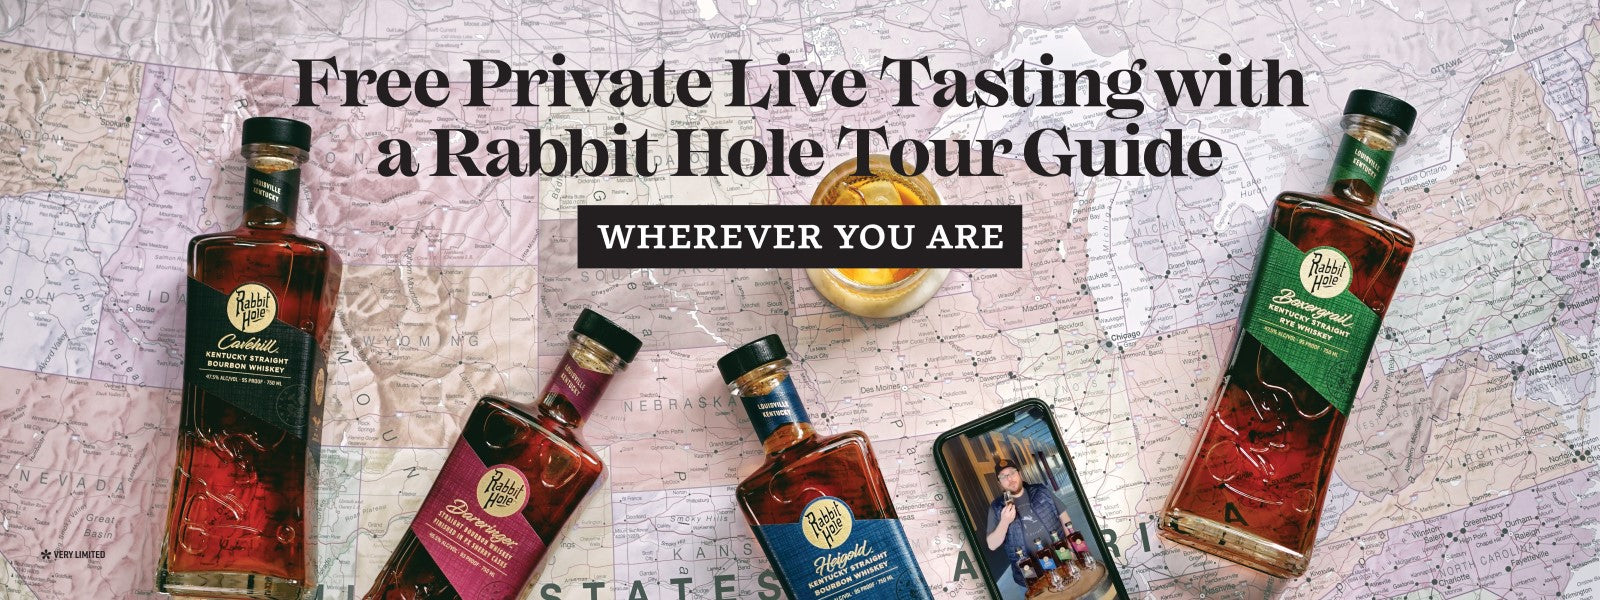 Buy Rabbit Hole Distillery Whiskey and Gin Online at CaskCartel.com